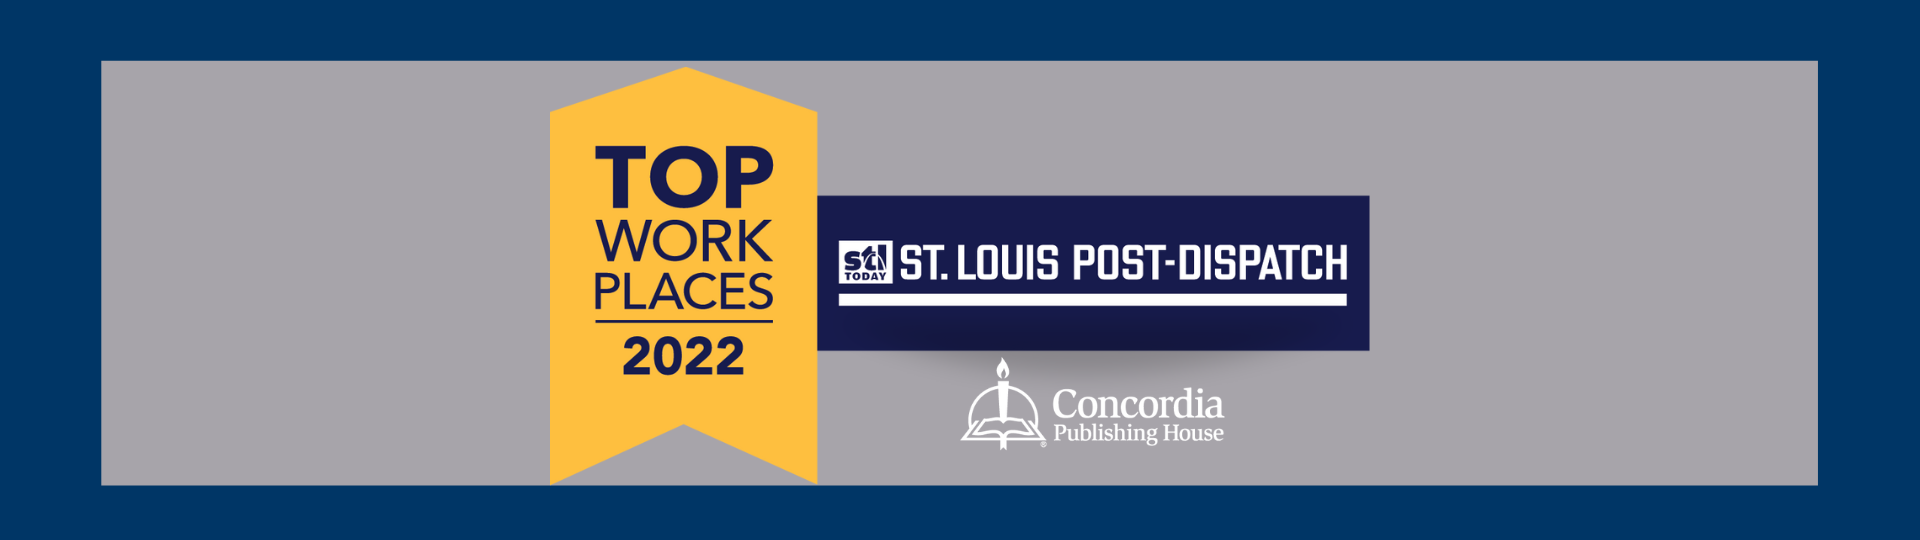 Press Release: Concordia Publishing House Recognized with Greater St. Louis Top Workplaces 2022 Award